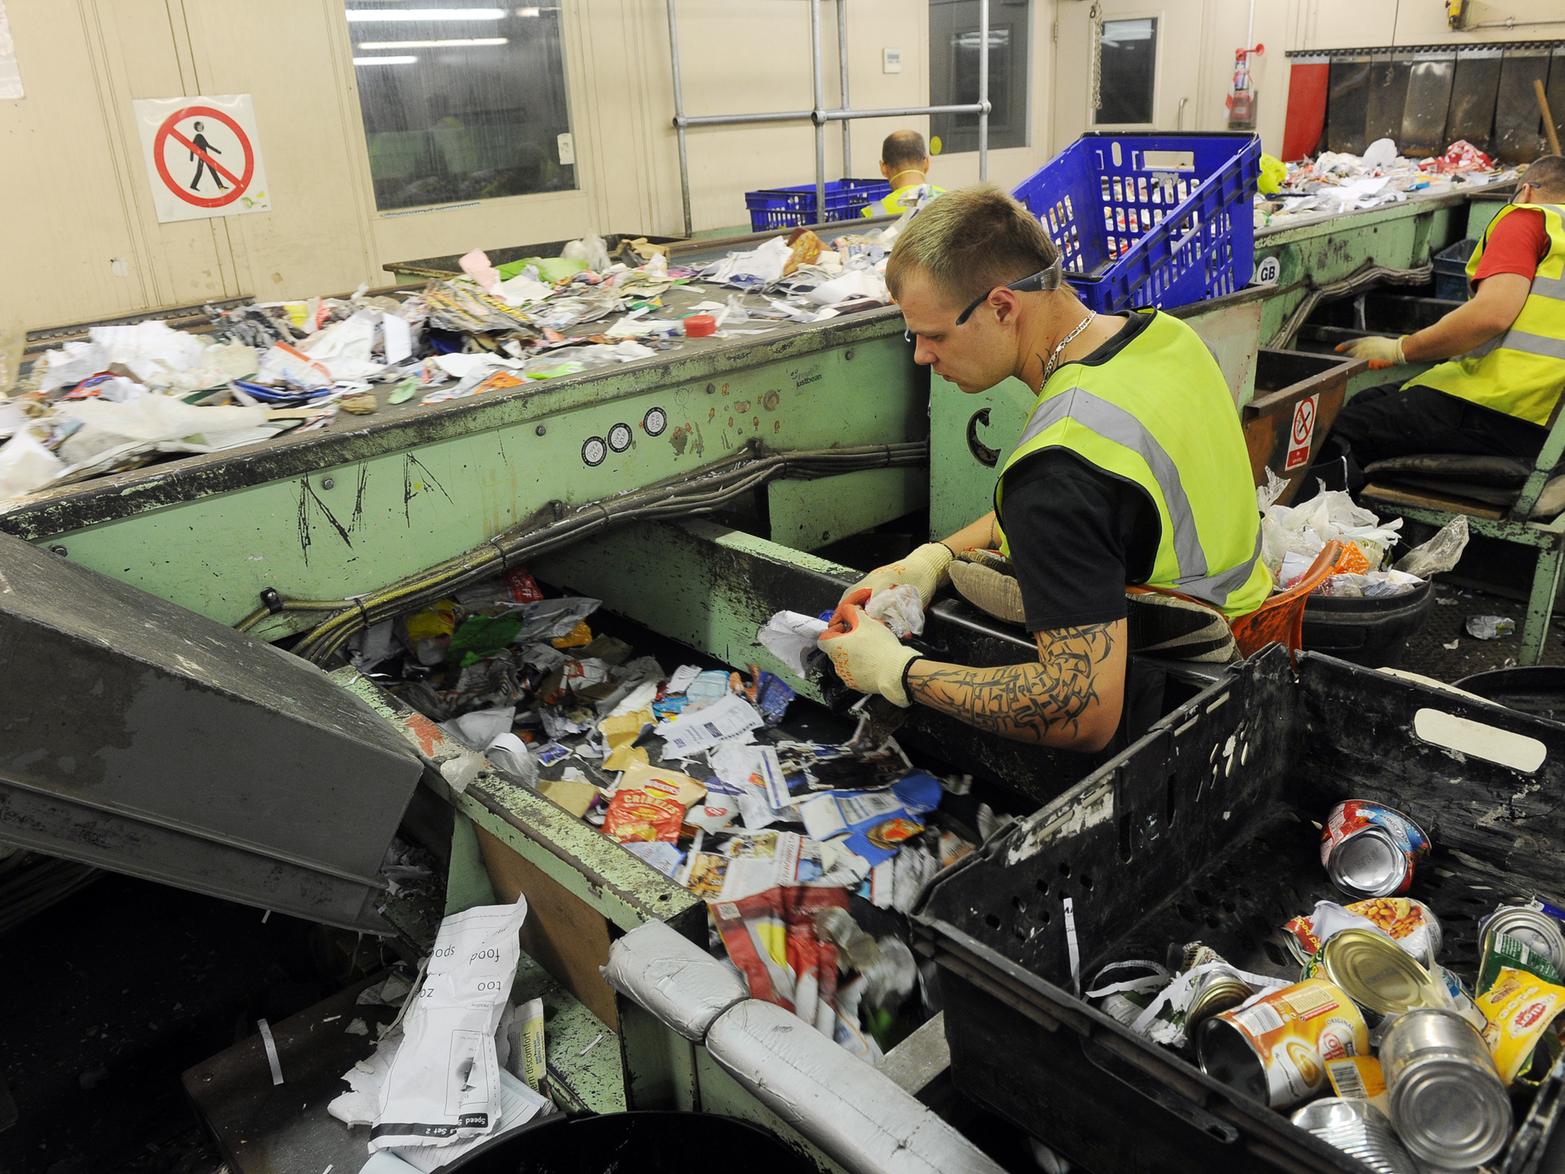 Leeds' recycling is sorted both by hand and machine at HW Martin in Hunslet